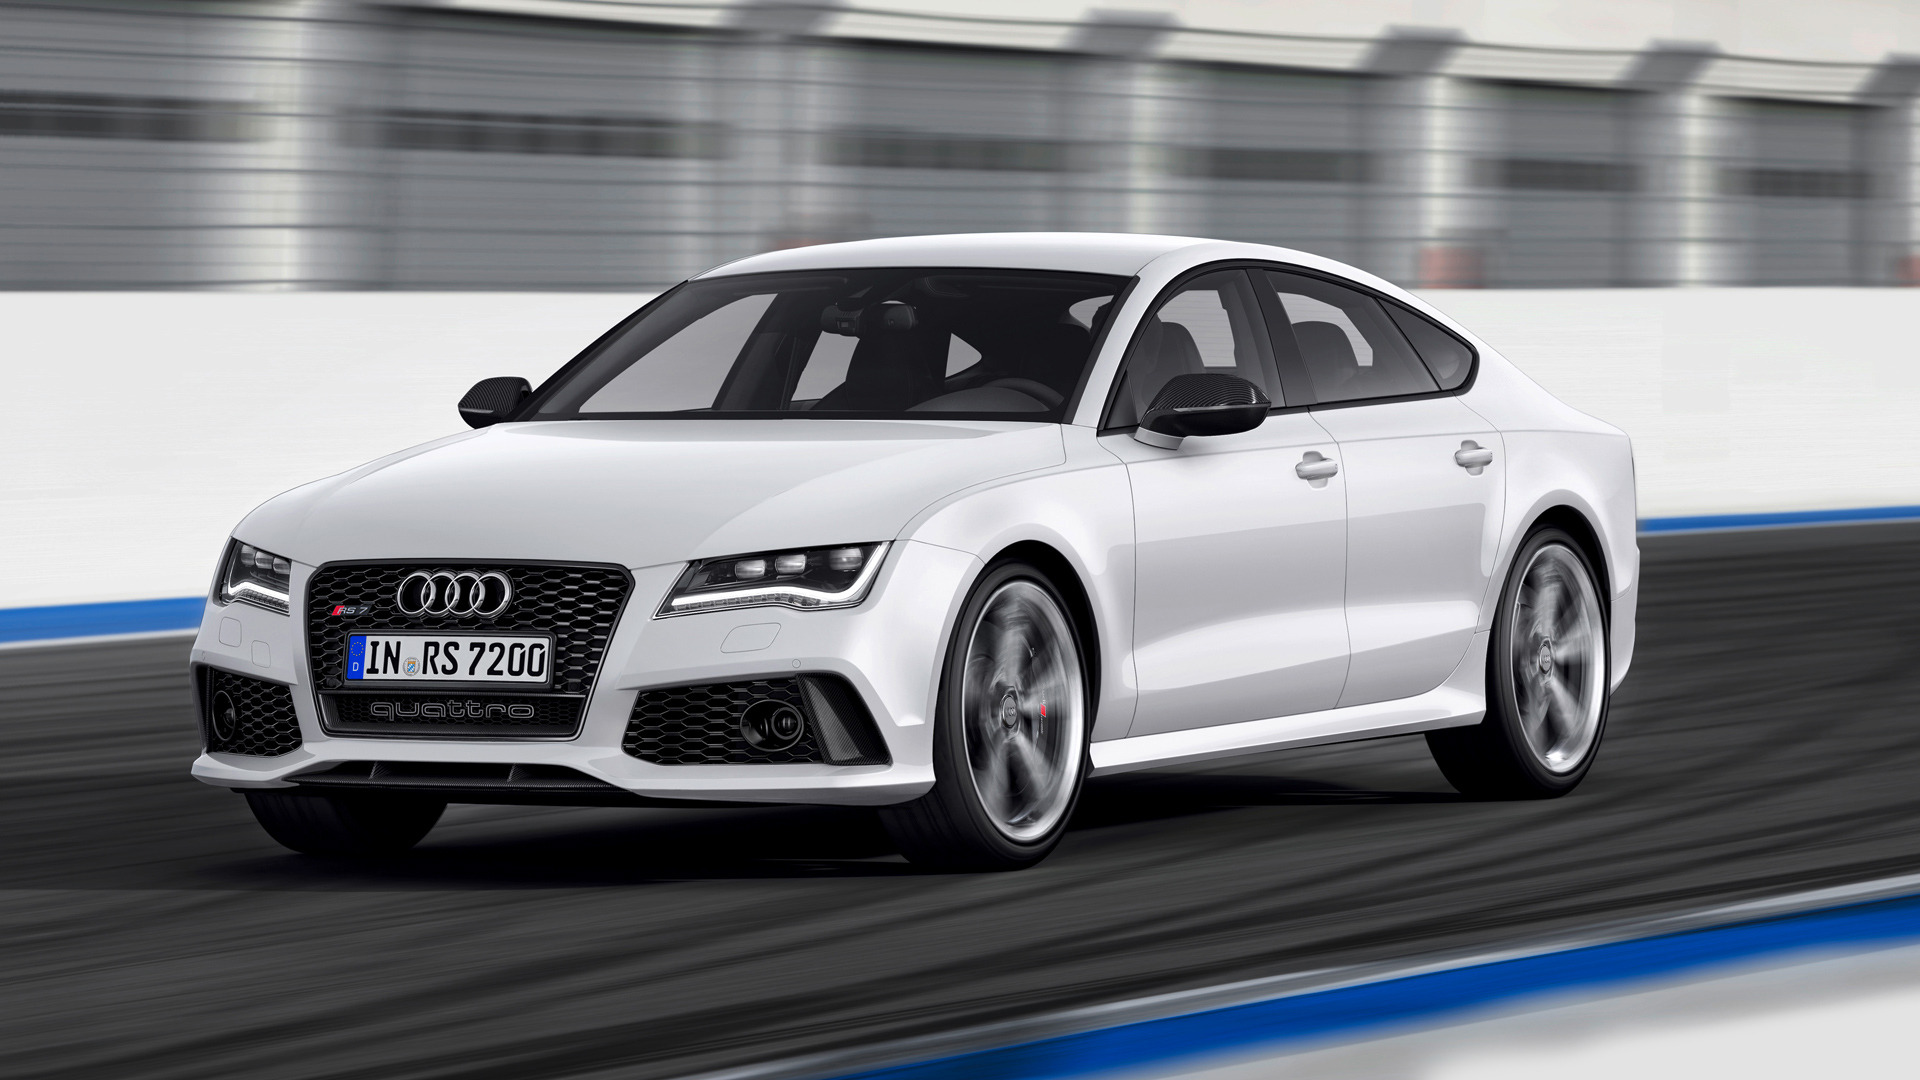 2014 Audi Rs7 Luxury HD Wallpaper Cars Wallpapers